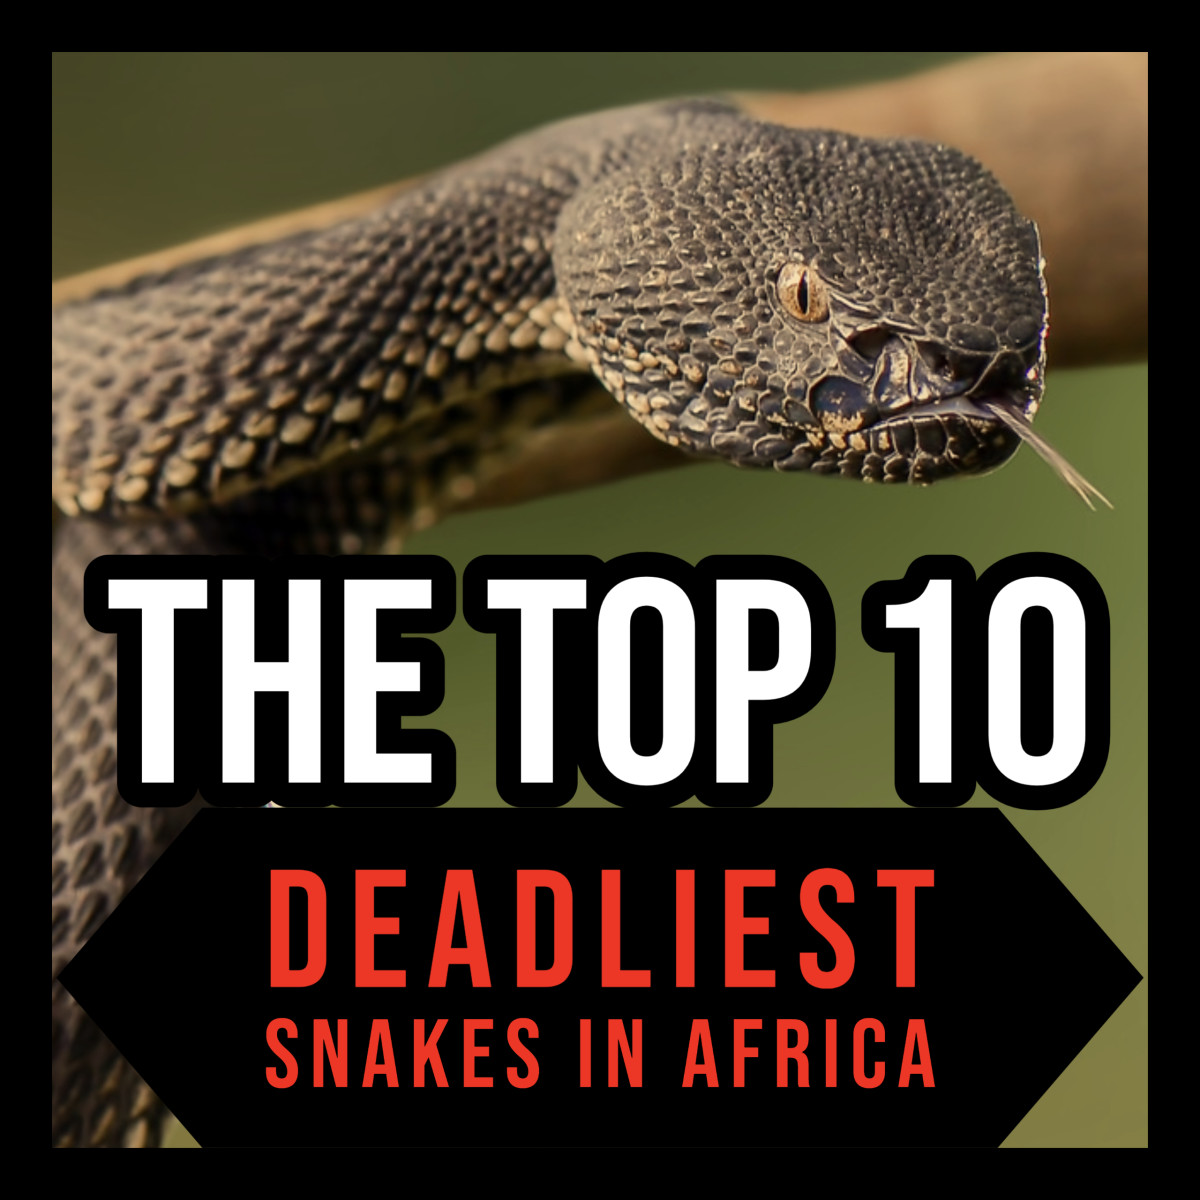 From the Mozambique spitting cobra to the infamous black mamba, this article ranks Africa's 10 deadliest snakes!